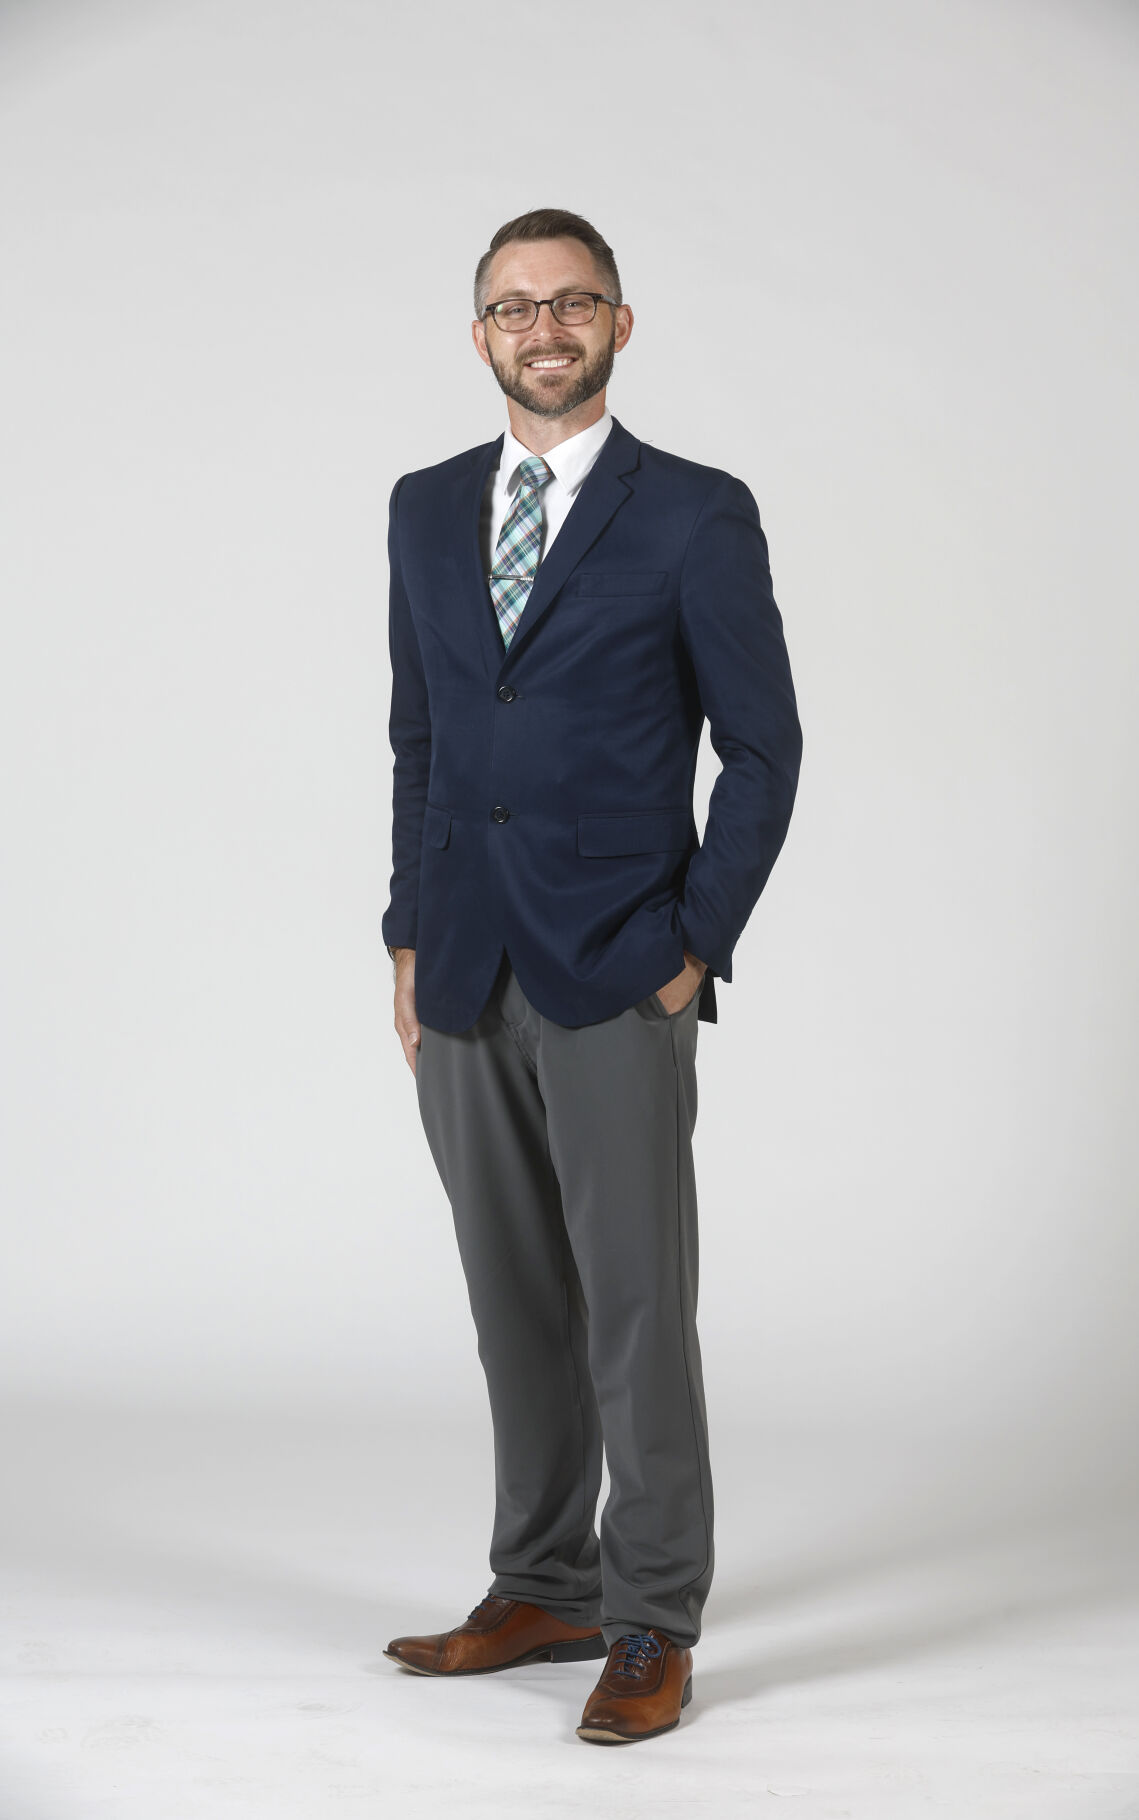 Dr. Nate Harold, with MedOne Pharmacy Benefit Solutions, is a Rising Star.    PHOTO CREDIT: Jessica Reilly